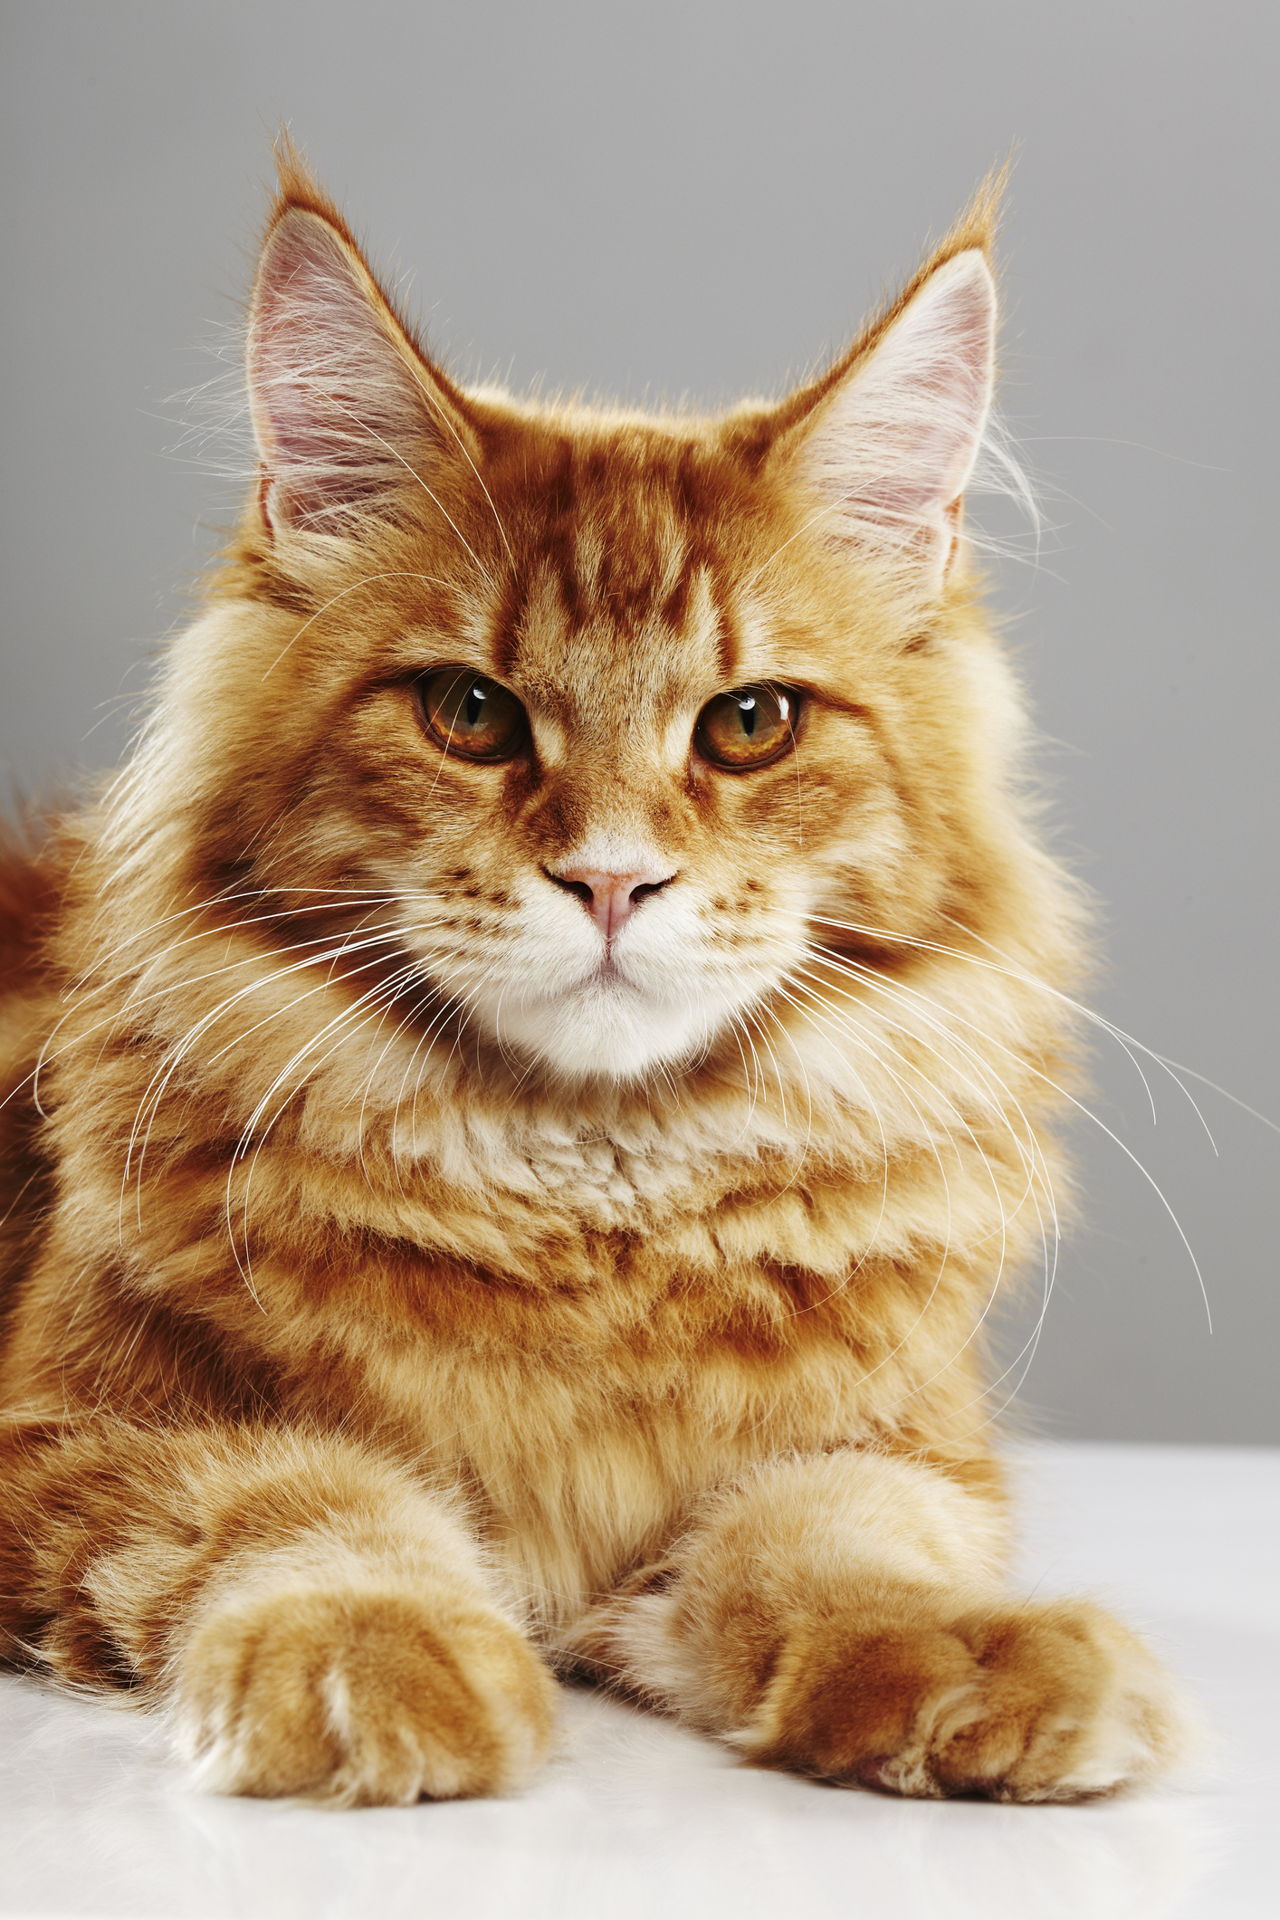 7 Large Domestic Cat Breeds That Make for Affectionate Companions Cat